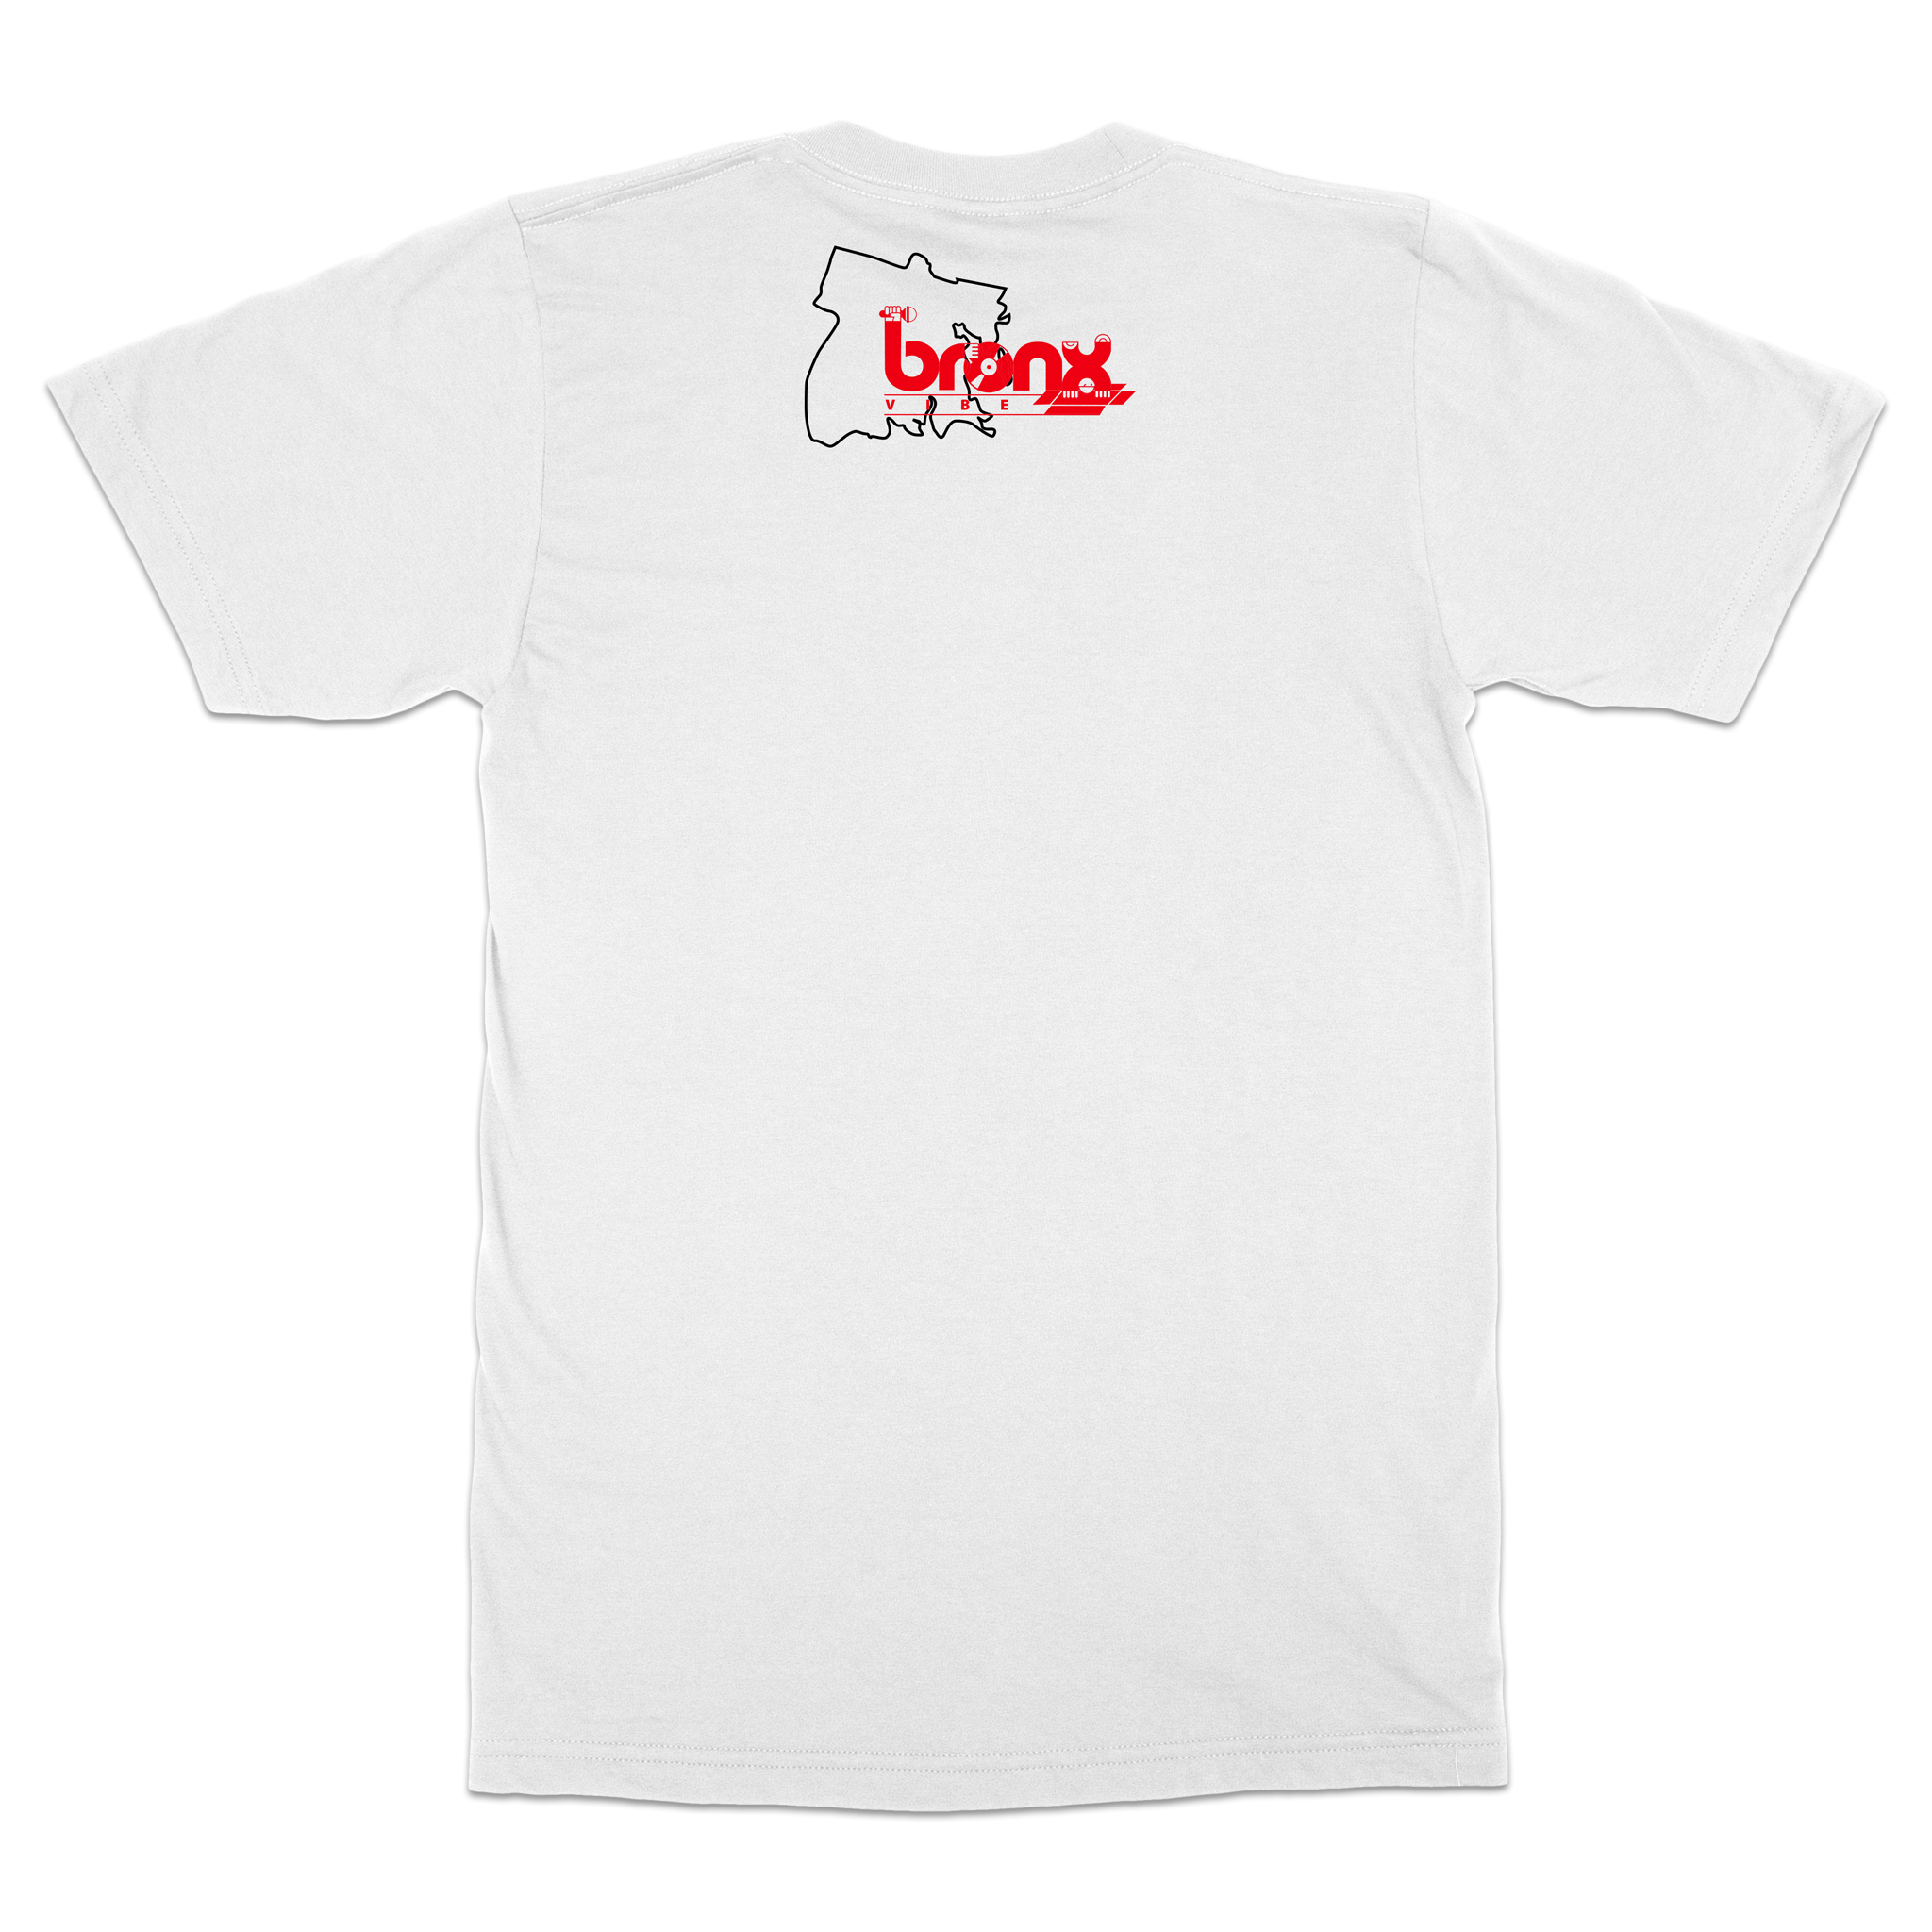 I AM THE BRONX T-Shirt Back in White